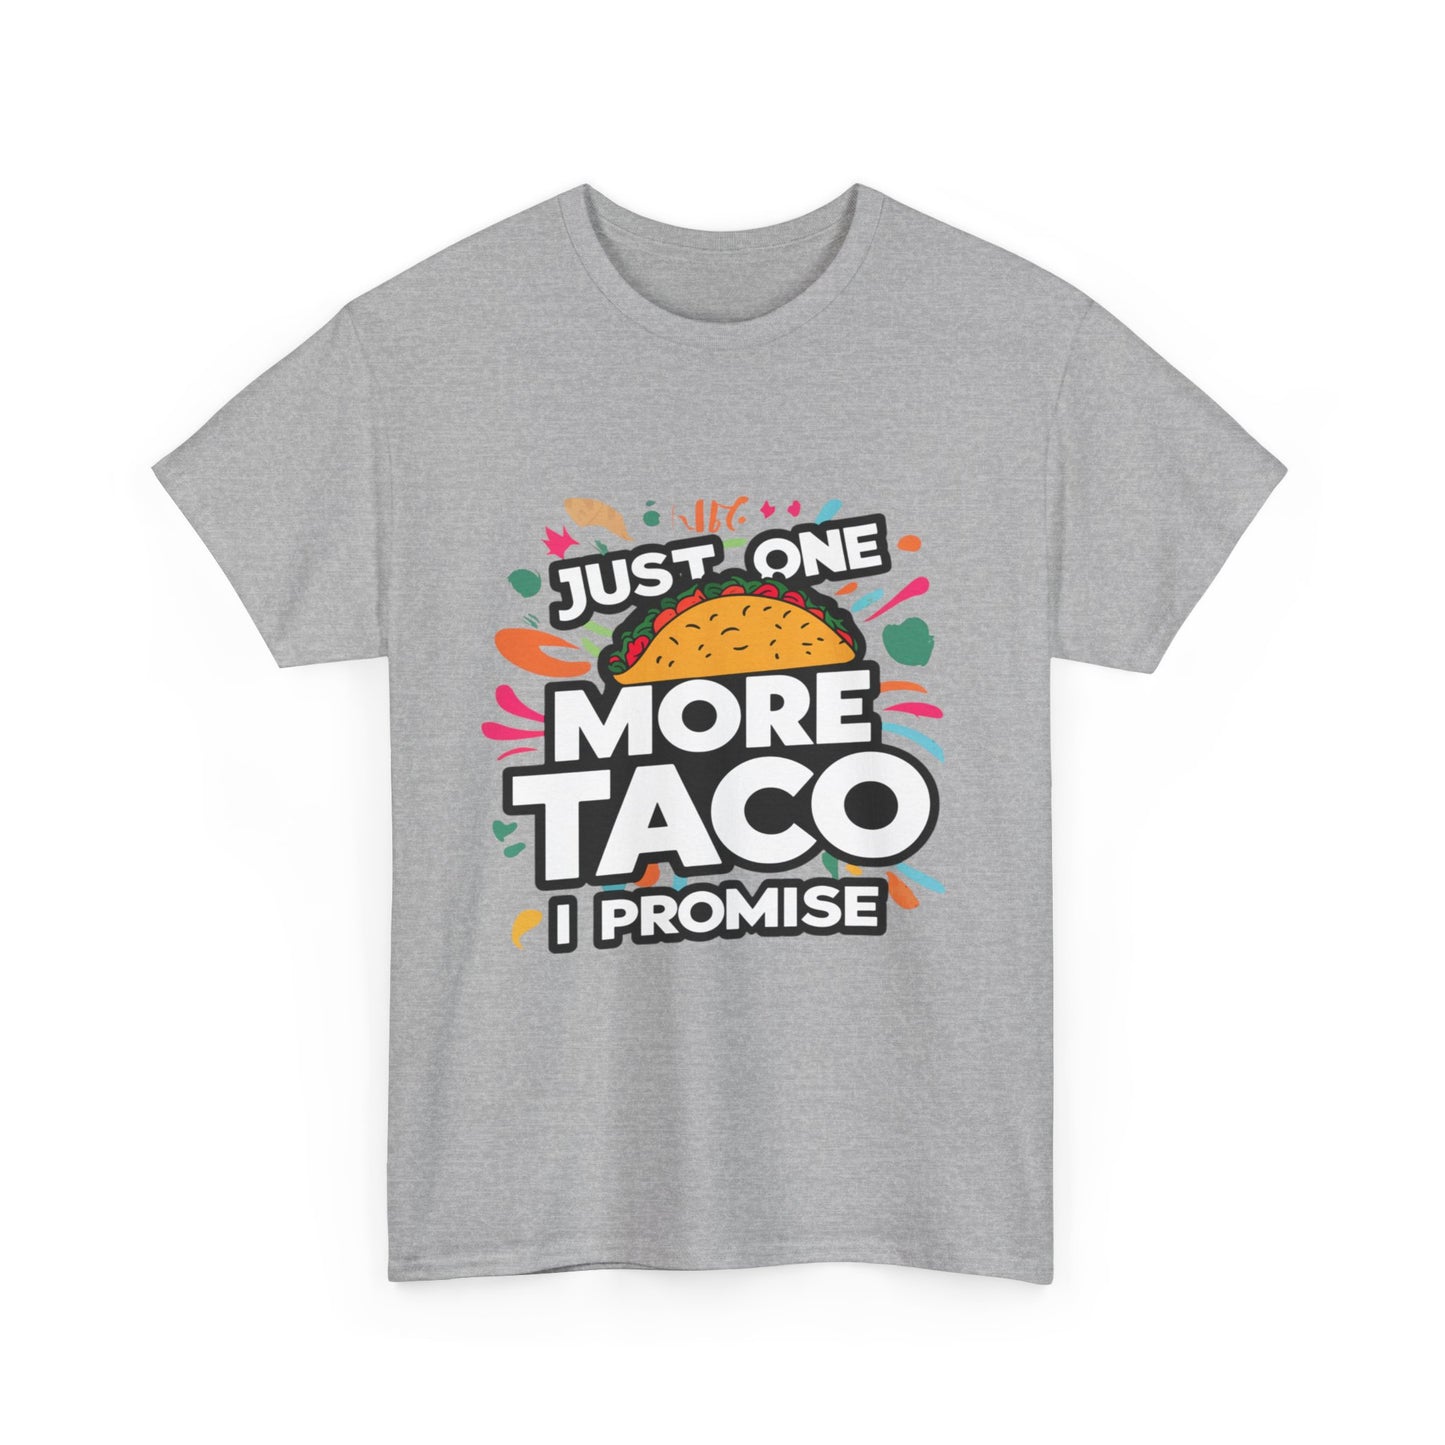 Just One More Taco I Promise Mexican Food Graphic Unisex Heavy Cotton Tee Cotton Funny Humorous Graphic Soft Premium Unisex Men Women Sport Grey T-shirt Birthday Gift-39